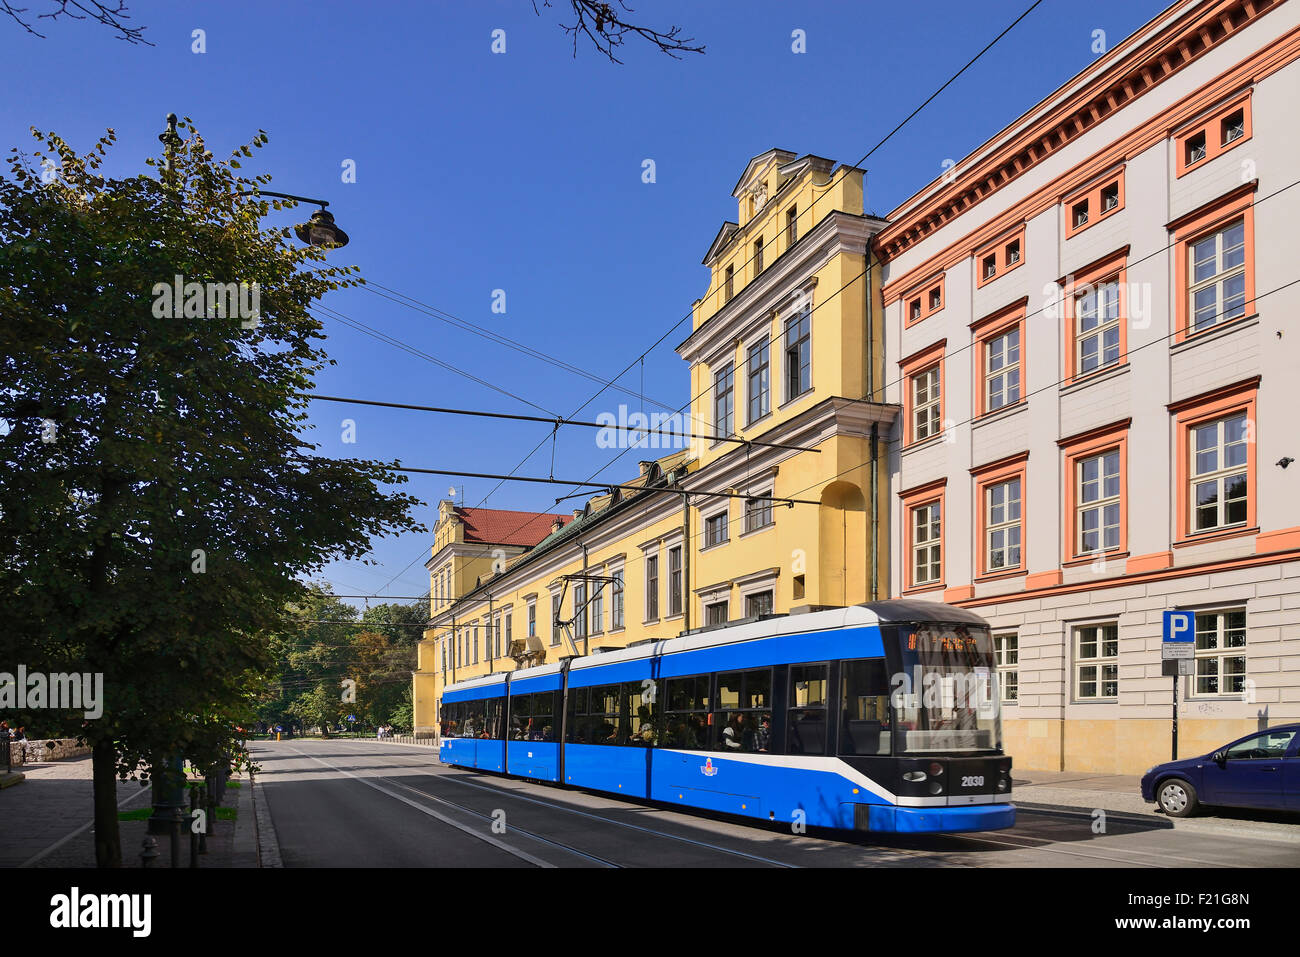 Poland, Krakow, Archbishop's Palace or Palac Biskupi, General view of the facade with city tram passing by. Stock Photo